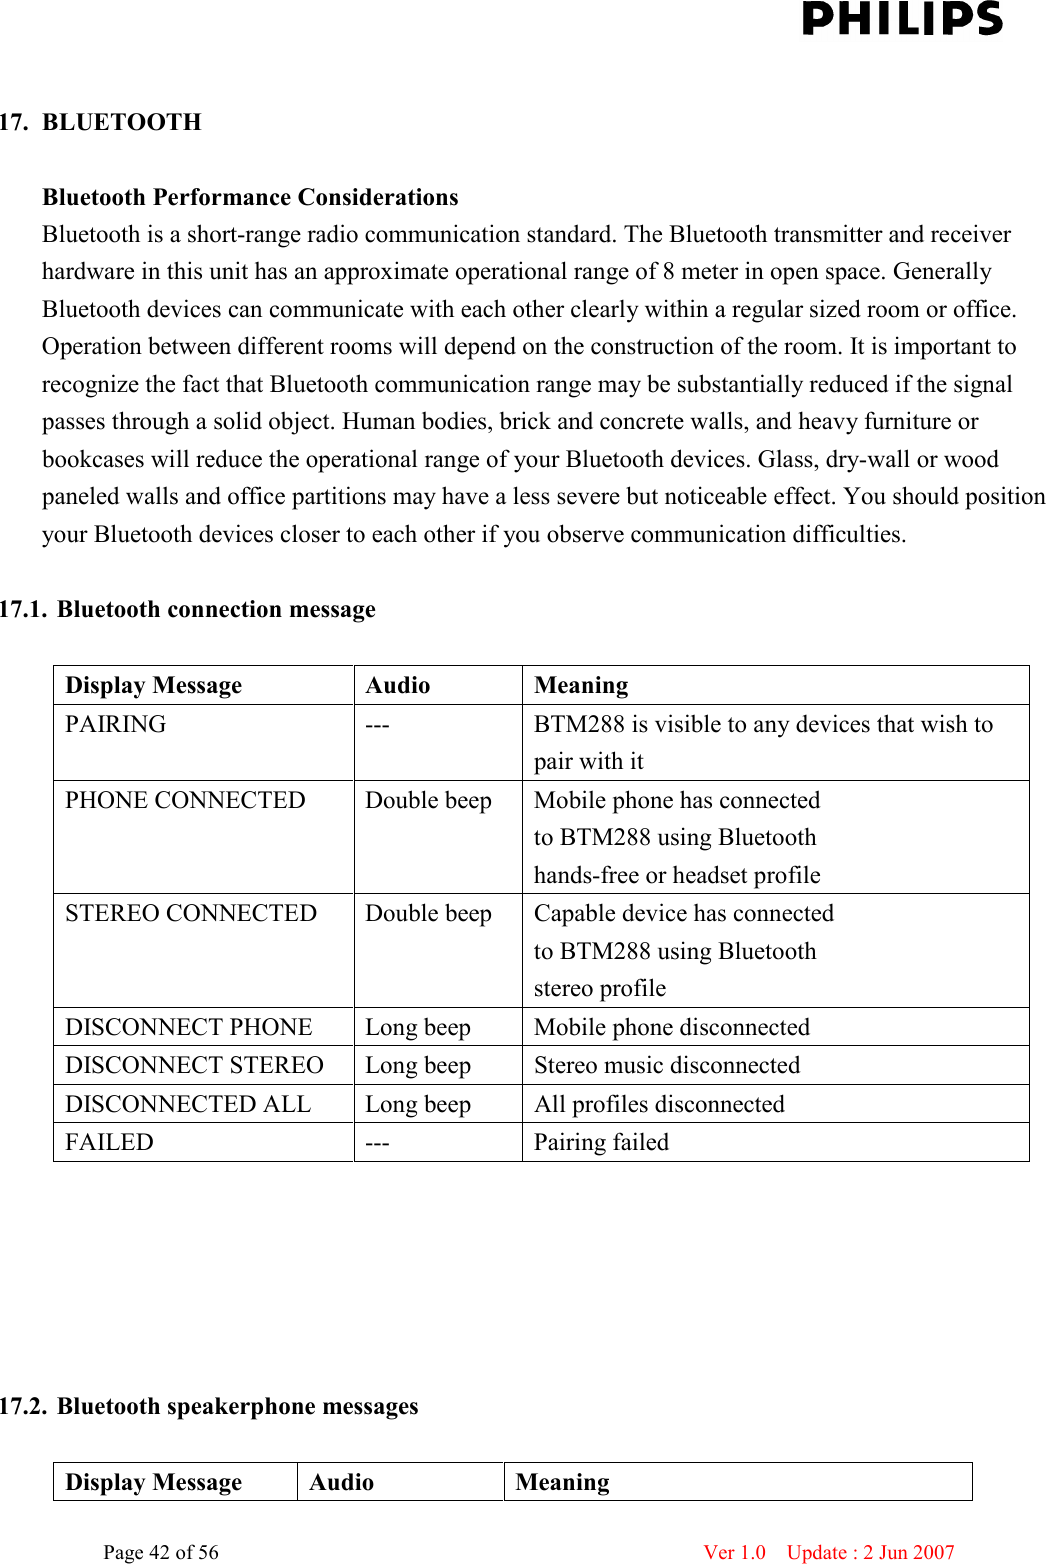    Page 42 of 56                      Ver 1.0    Update : 2 Jun 2007   17. BLUETOOTH  Bluetooth Performance Considerations Bluetooth is a short-range radio communication standard. The Bluetooth transmitter and receiver hardware in this unit has an approximate operational range of 8 meter in open space. Generally Bluetooth devices can communicate with each other clearly within a regular sized room or office. Operation between different rooms will depend on the construction of the room. It is important to recognize the fact that Bluetooth communication range may be substantially reduced if the signal passes through a solid object. Human bodies, brick and concrete walls, and heavy furniture or bookcases will reduce the operational range of your Bluetooth devices. Glass, dry-wall or wood paneled walls and office partitions may have a less severe but noticeable effect. You should position your Bluetooth devices closer to each other if you observe communication difficulties.  17.1. Bluetooth connection message  Display Message  Audio  Meaning PAIRING  ---  BTM288 is visible to any devices that wish to pair with it   PHONE CONNECTED  Double beep  Mobile phone has connected     to BTM288 using Bluetooth   hands-free or headset profile   STEREO CONNECTED  Double beep  Capable device has connected     to BTM288 using Bluetooth   stereo profile   DISCONNECT PHONE  Long beep  Mobile phone disconnected DISCONNECT STEREO  Long beep  Stereo music disconnected DISCONNECTED ALL  Long beep  All profiles disconnected FAILED  ---  Pairing failed       17.2. Bluetooth speakerphone messages  Display Message  Audio  Meaning 